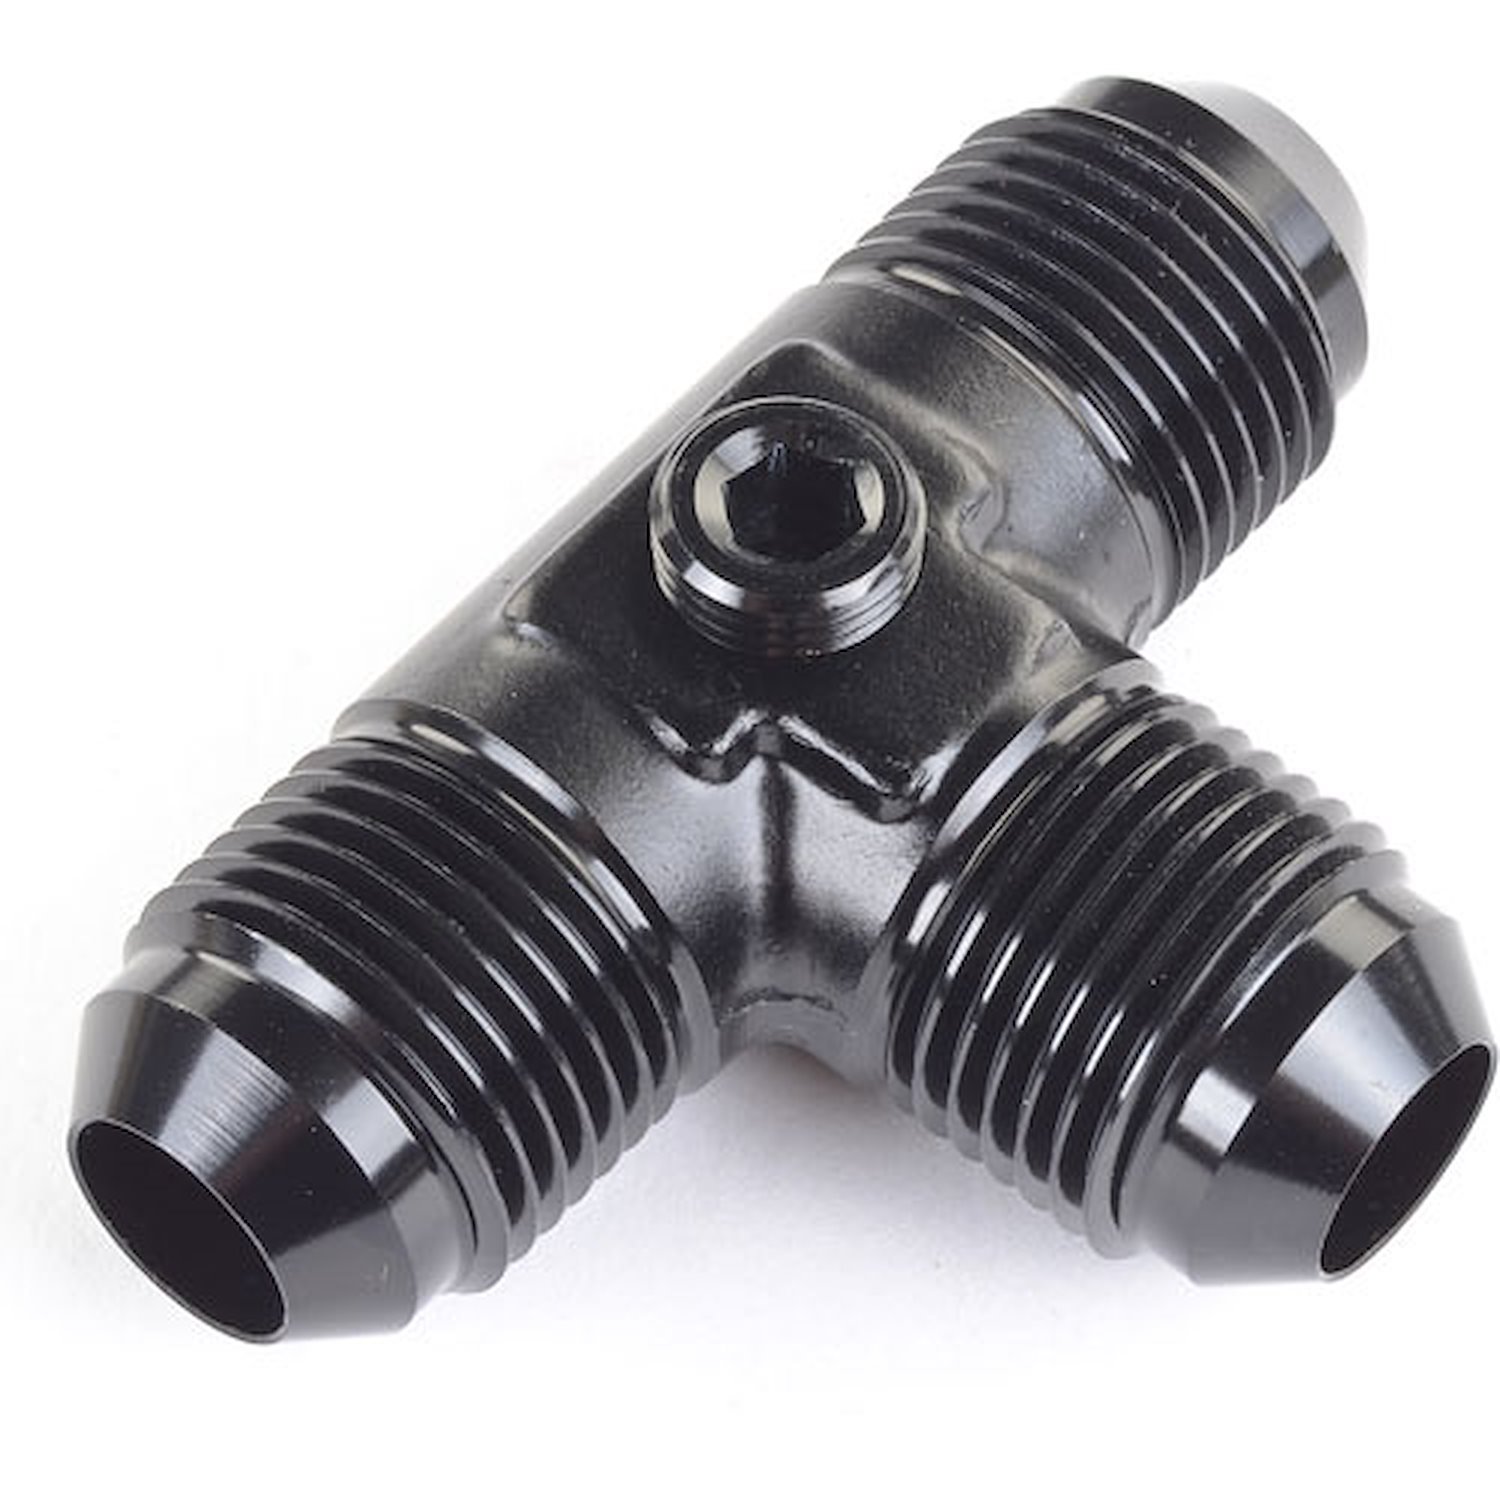 Fuel Pressure T-Fitting -8AN Tee with 1/8" NPT Tap